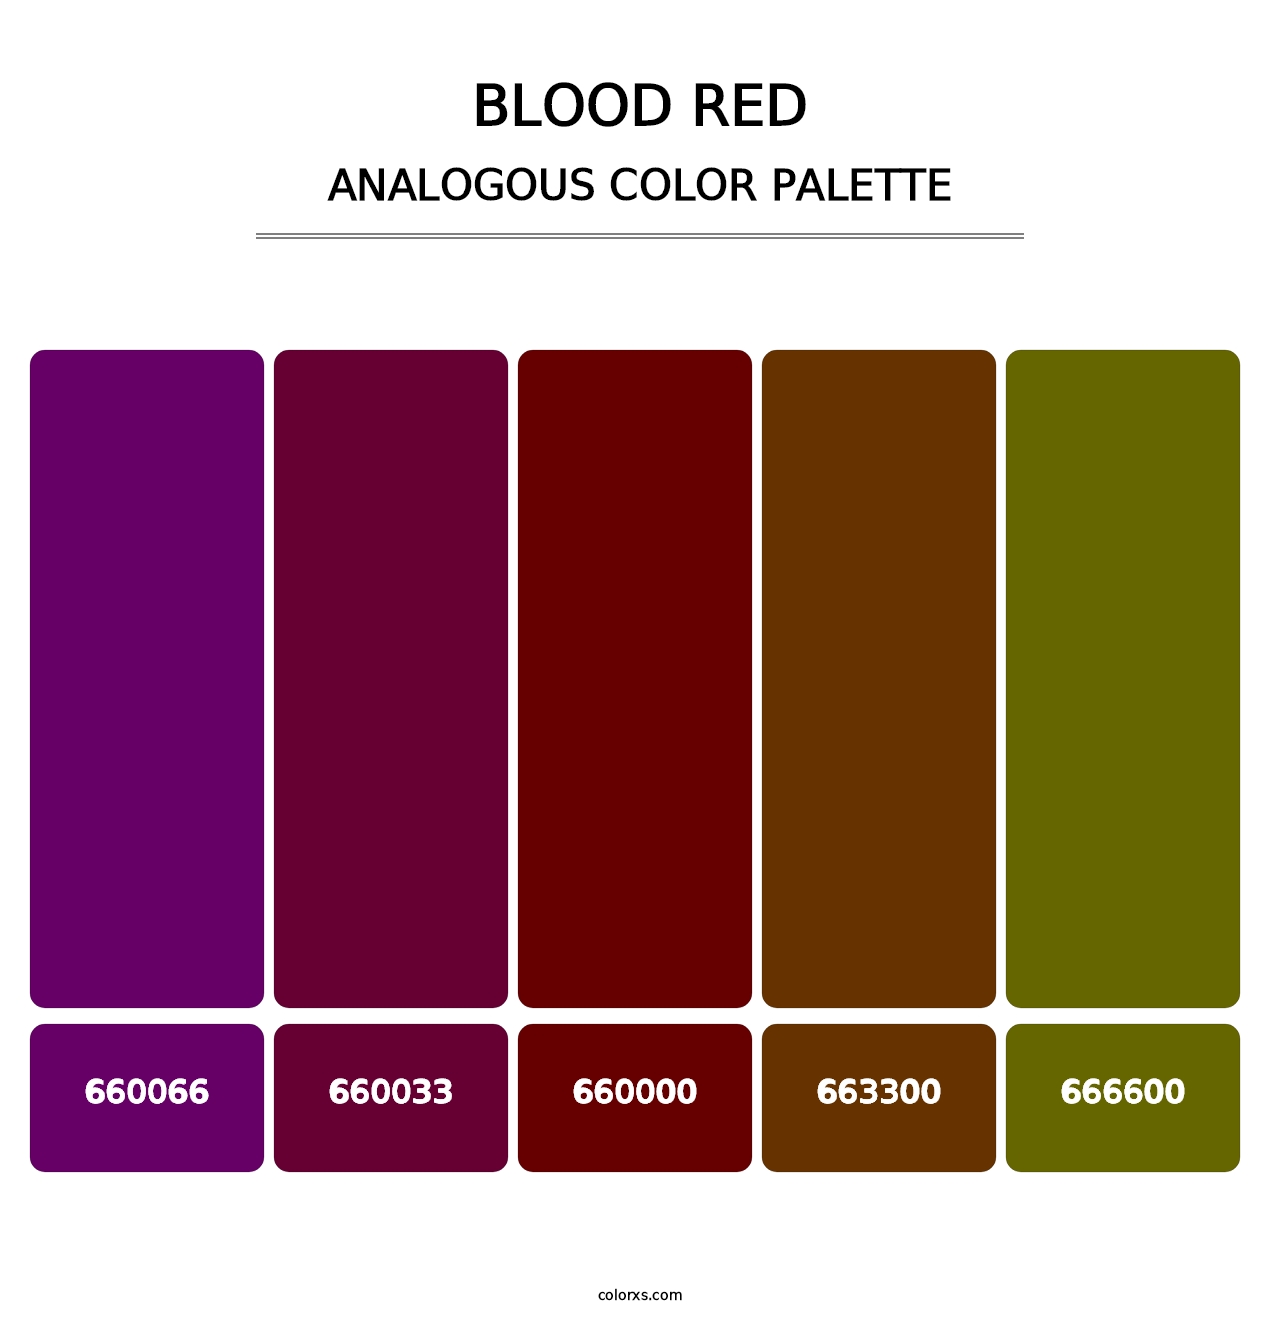 Blood Red - Analogous Color Palette